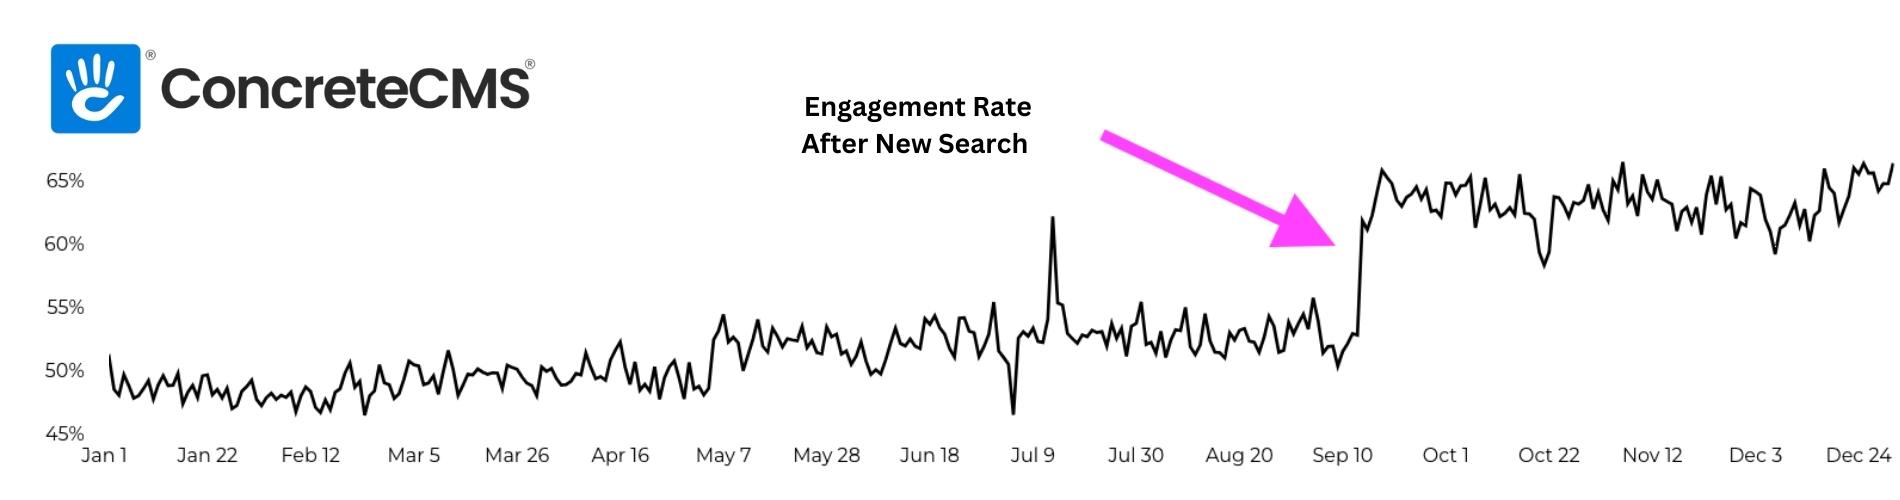 Engagement Rate After New Search